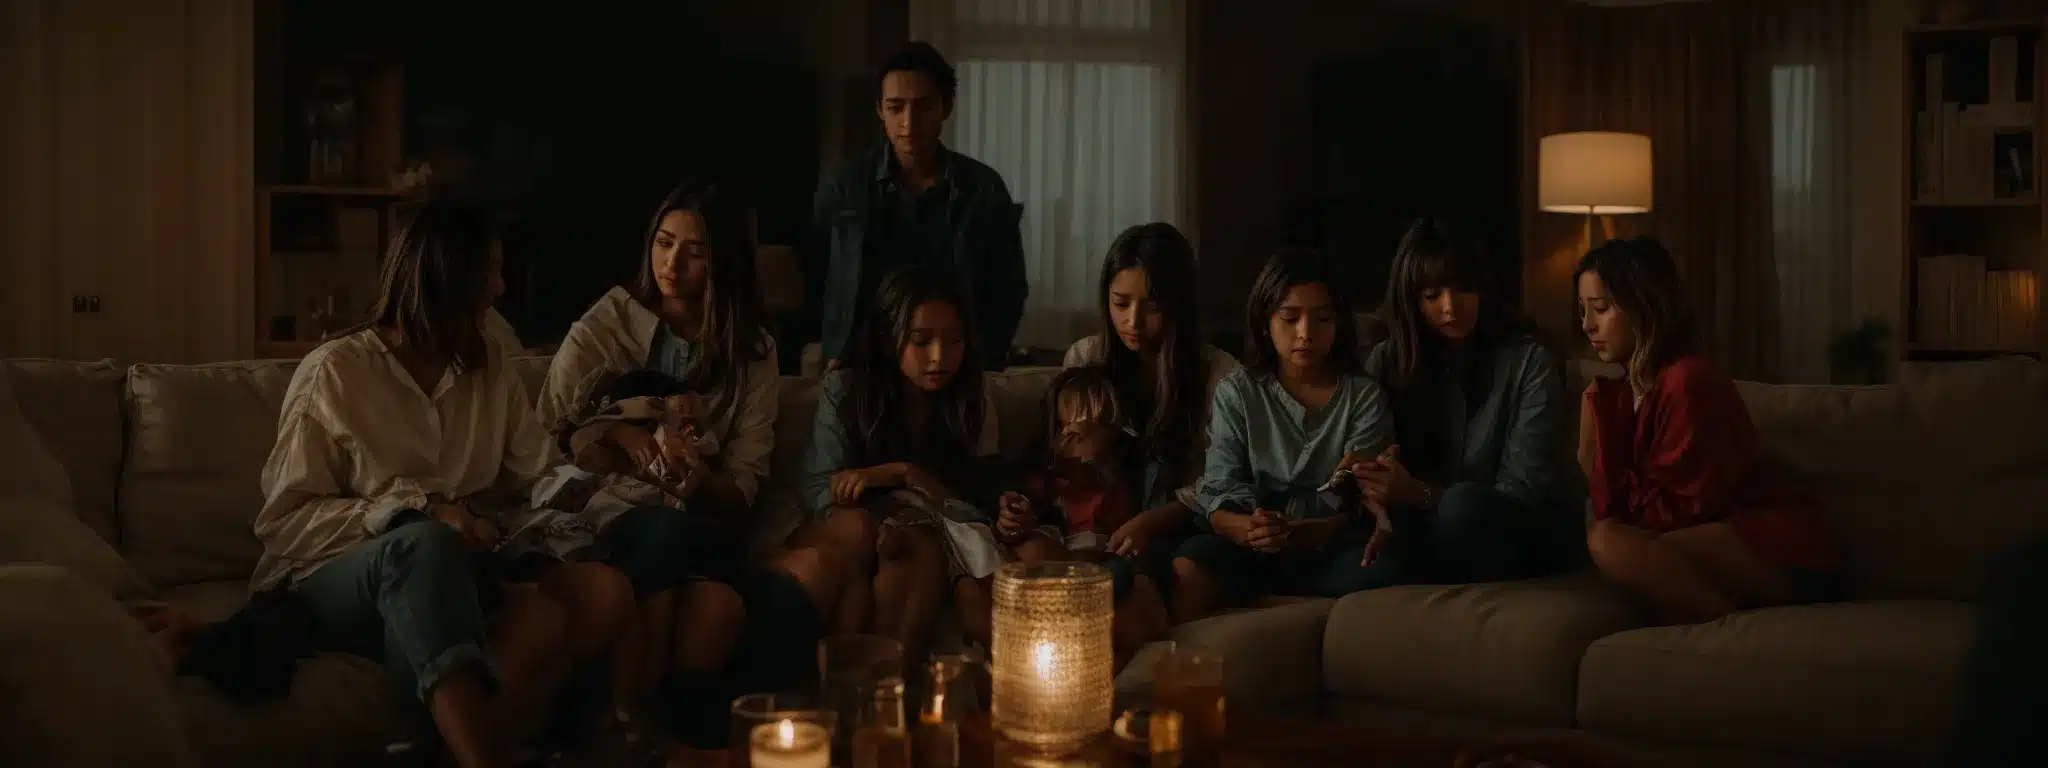 A Family Gathers Around A Softly Illuminated Living Room, Sharing Stories With Visible Warmth And Connection.